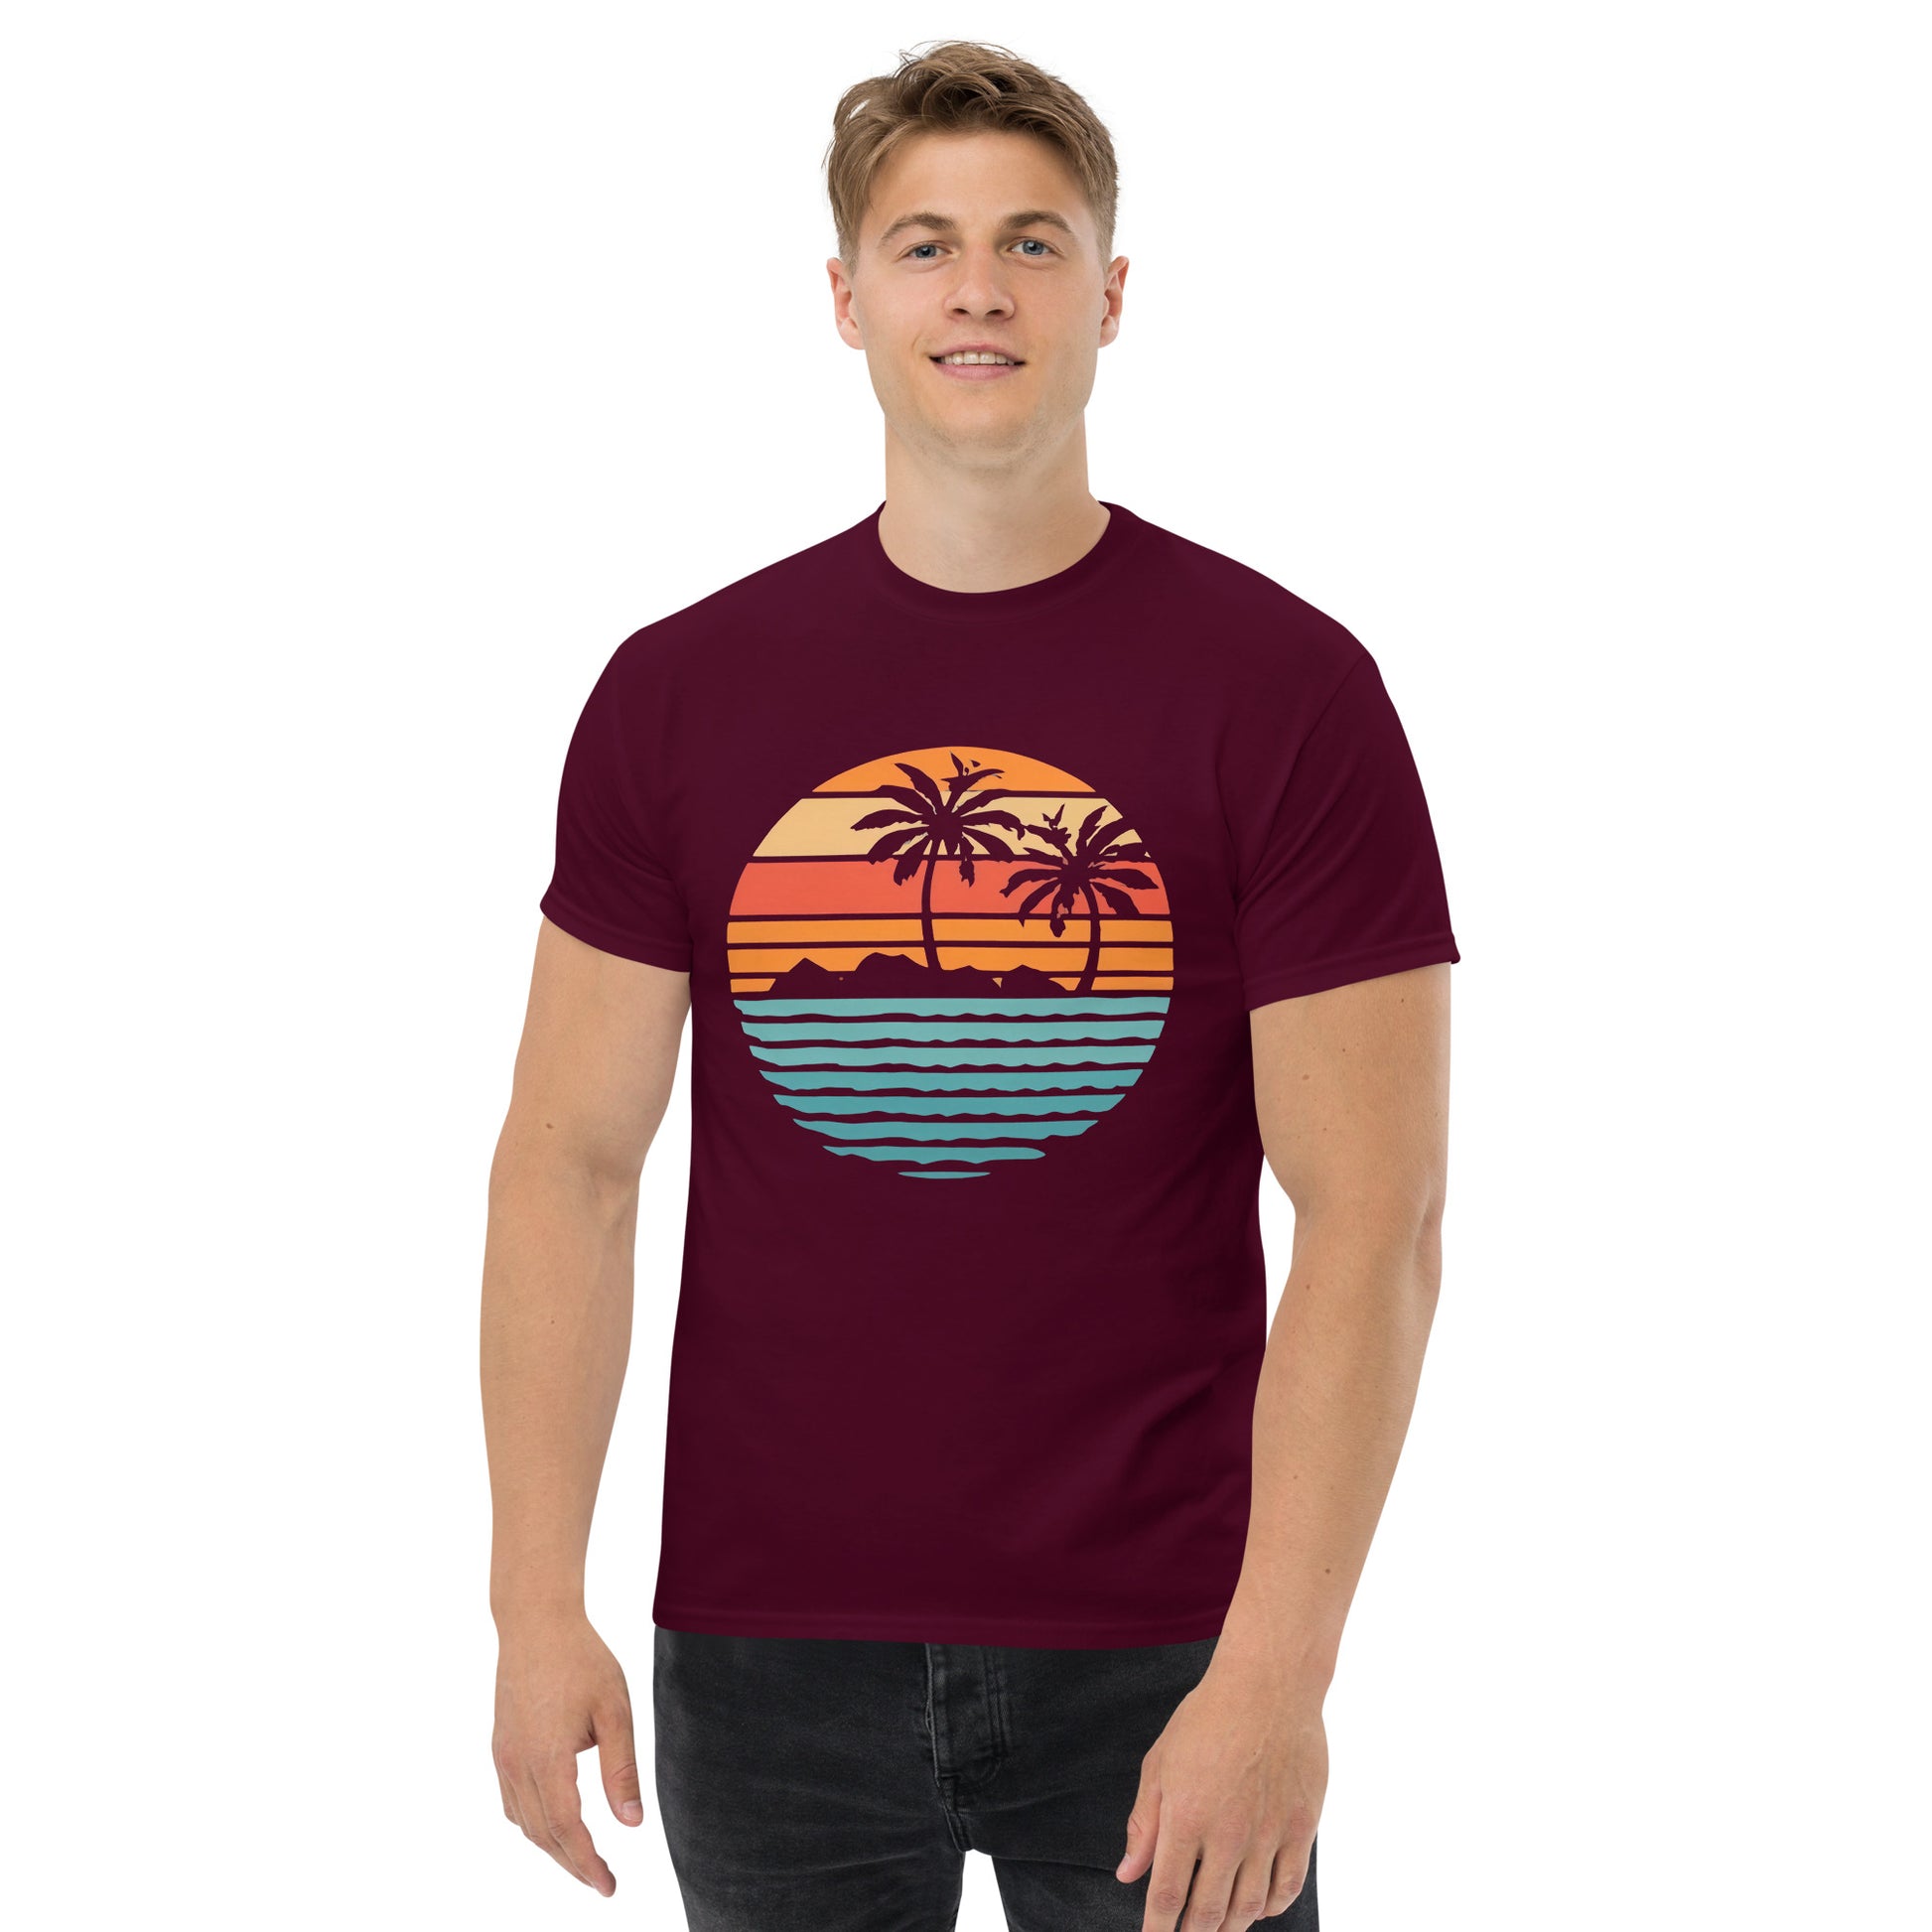 Men with maroon T-shirt and a retro Island